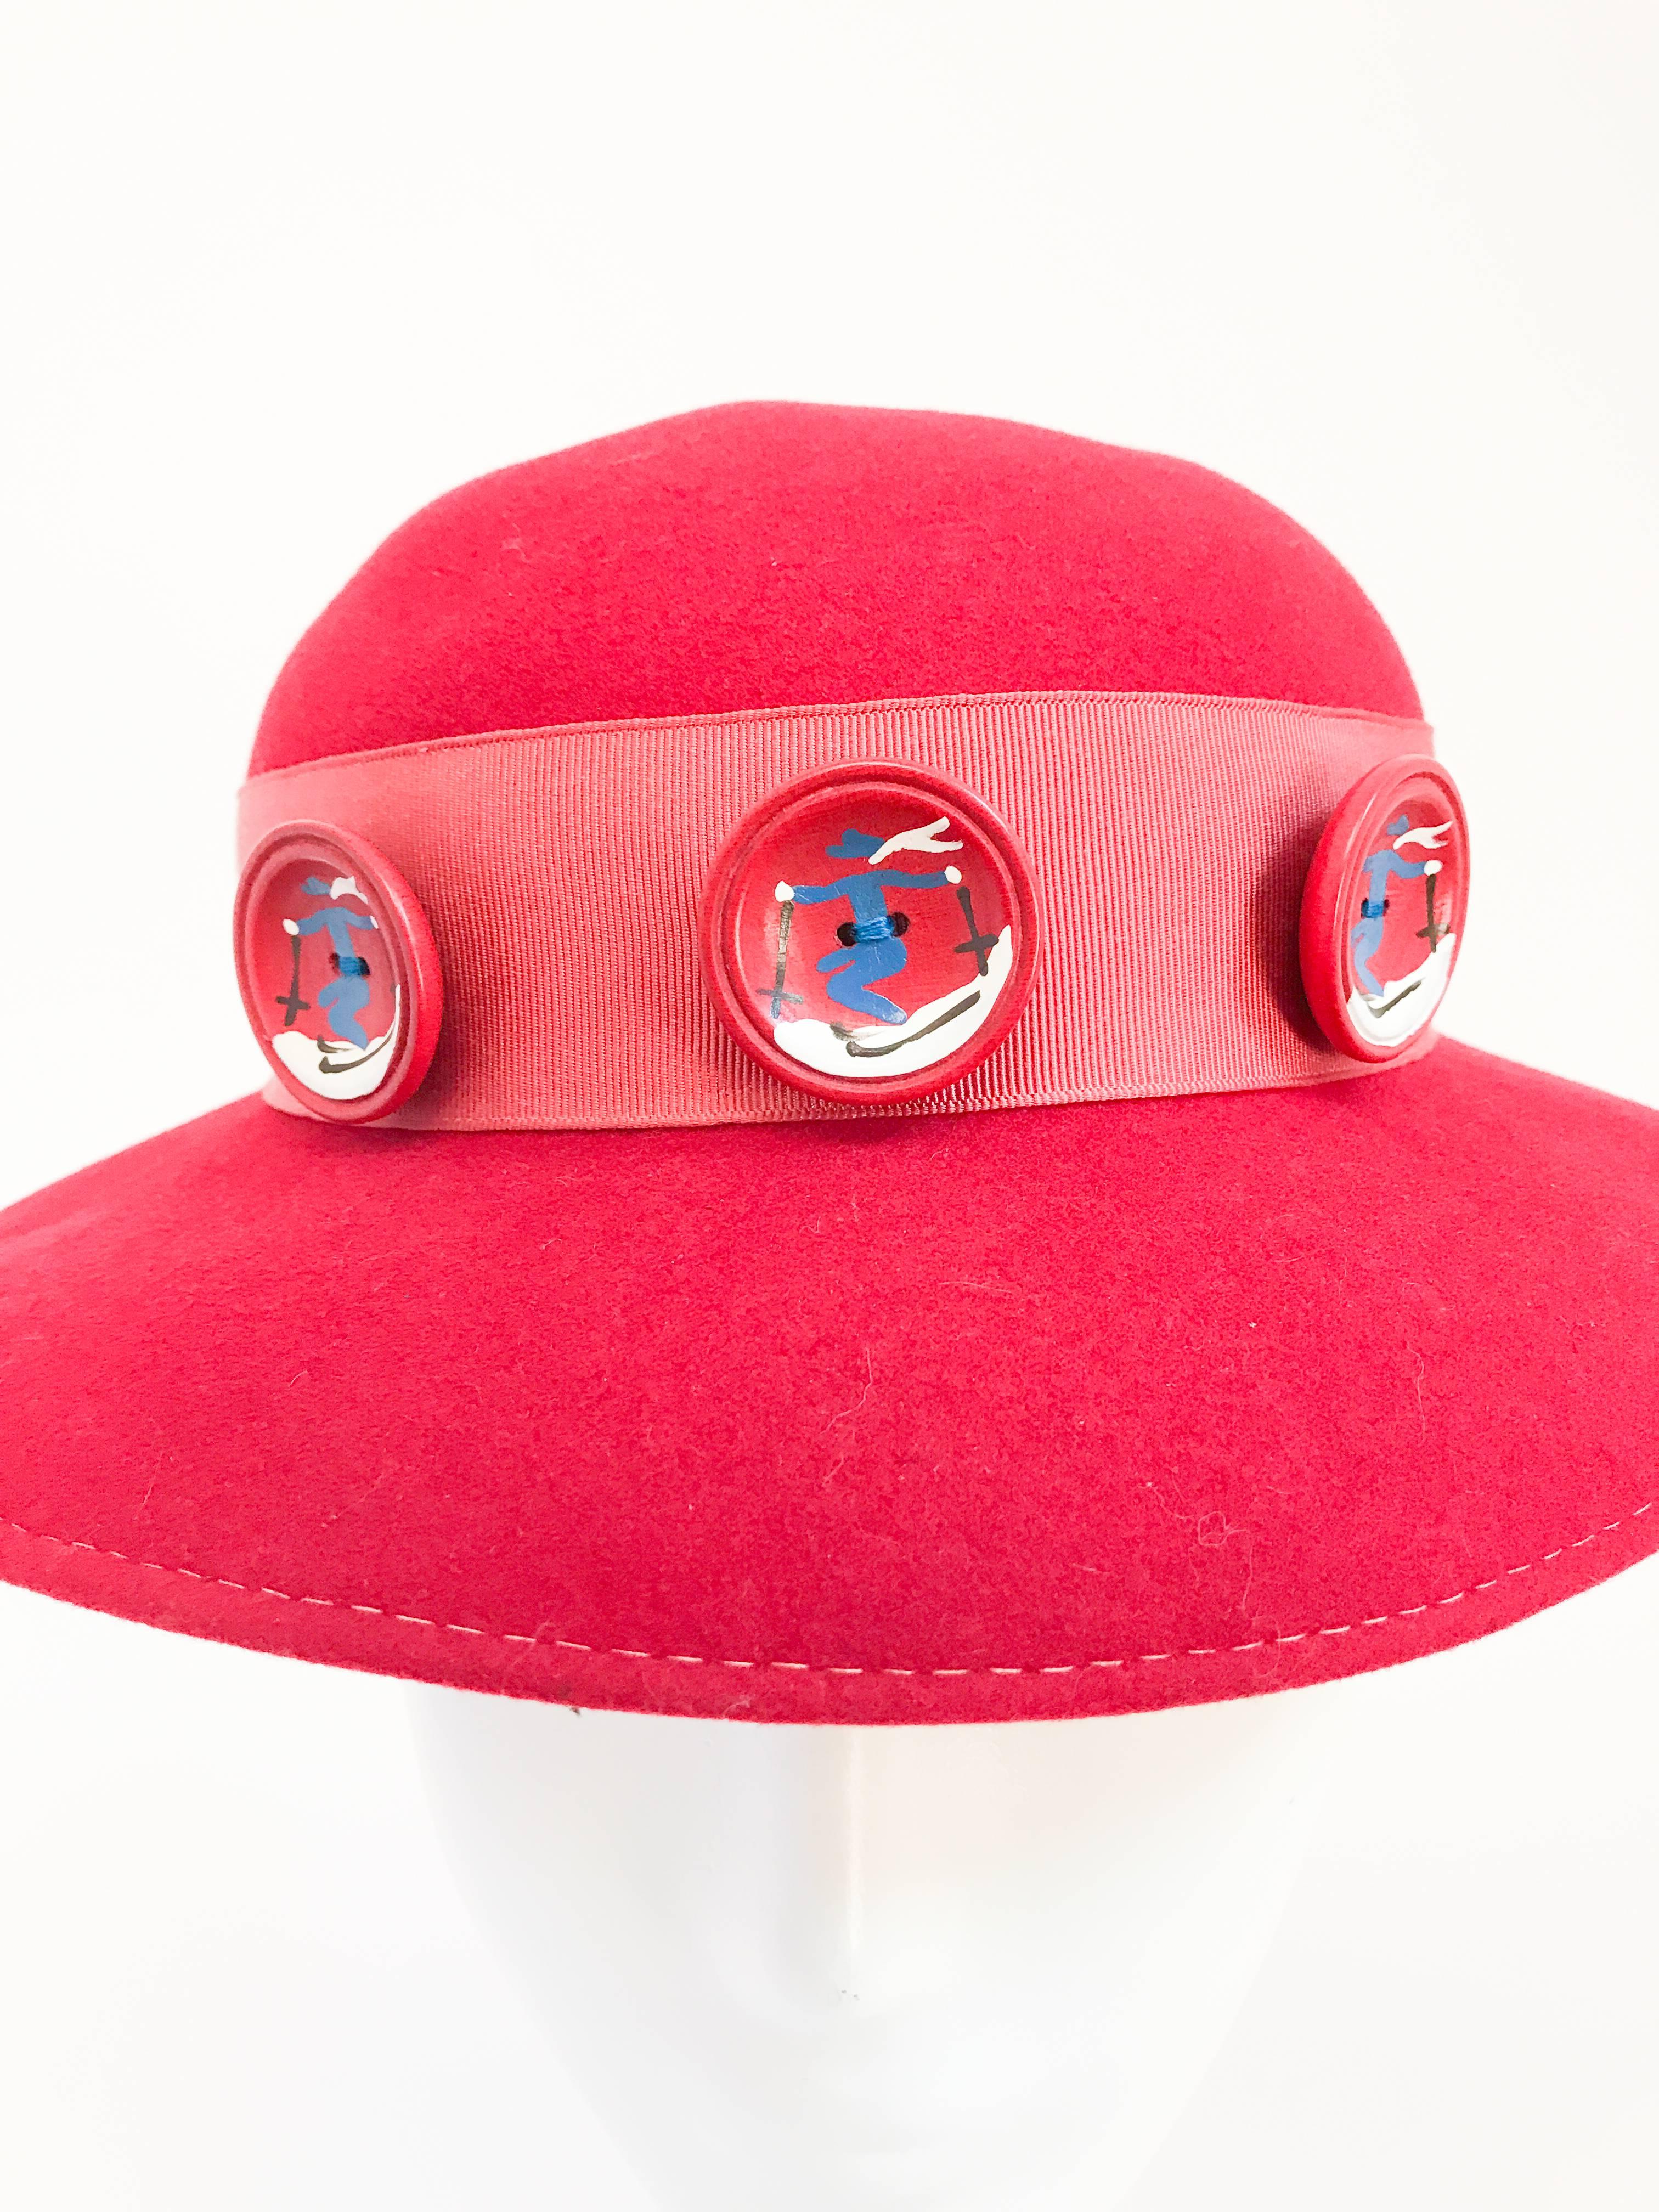 1930s Red Felt hat with Hand Painted Ski Buttons For Sale 2